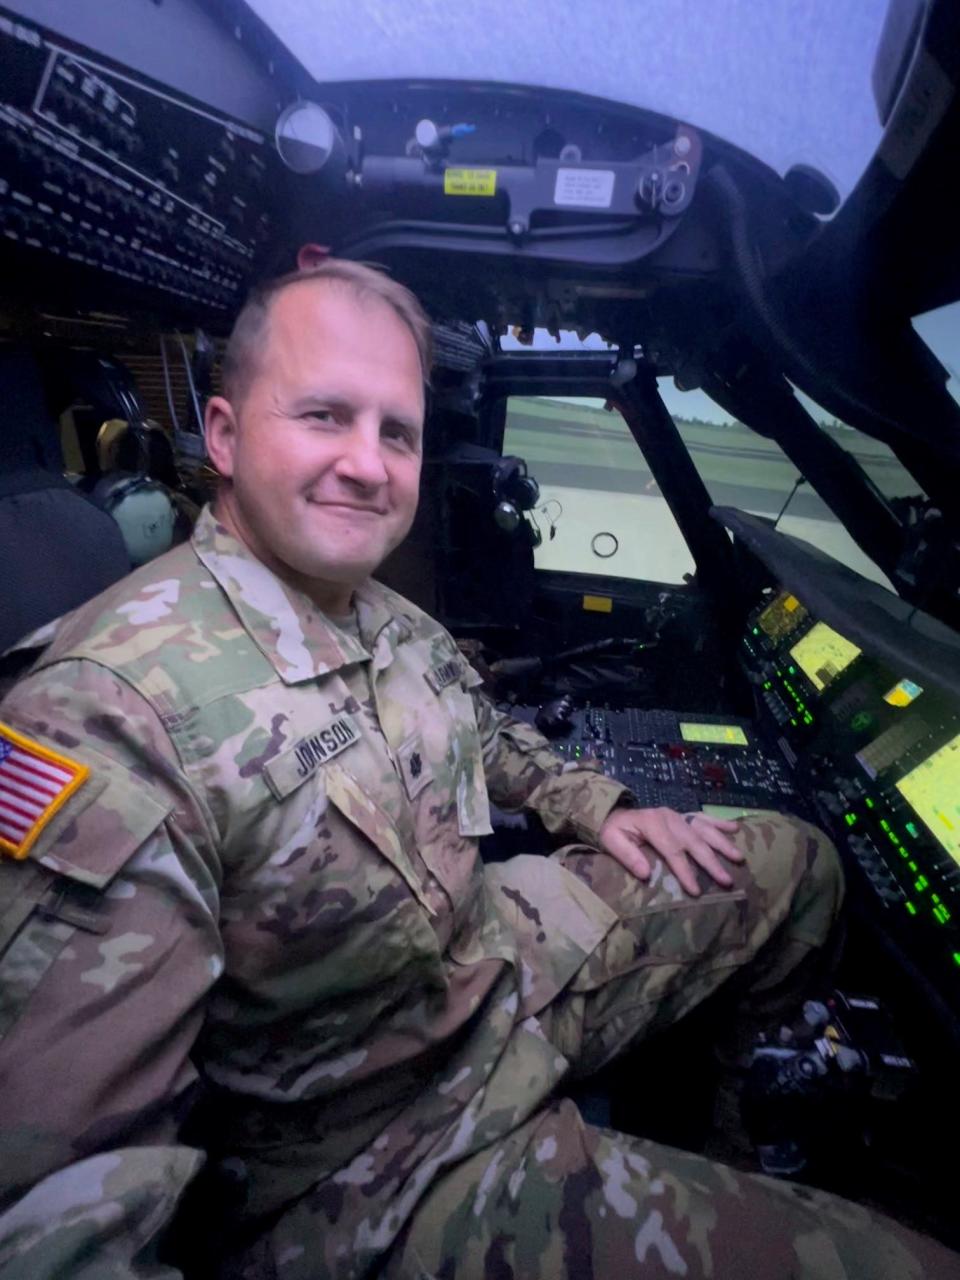 Lancaster High School 1995 graduate Lt. Col. Kristopher Johnson recently took command of all Ohio Army National Guard Army Aviation units as the new battalion commander. He now commands all Ohio army aviation units.